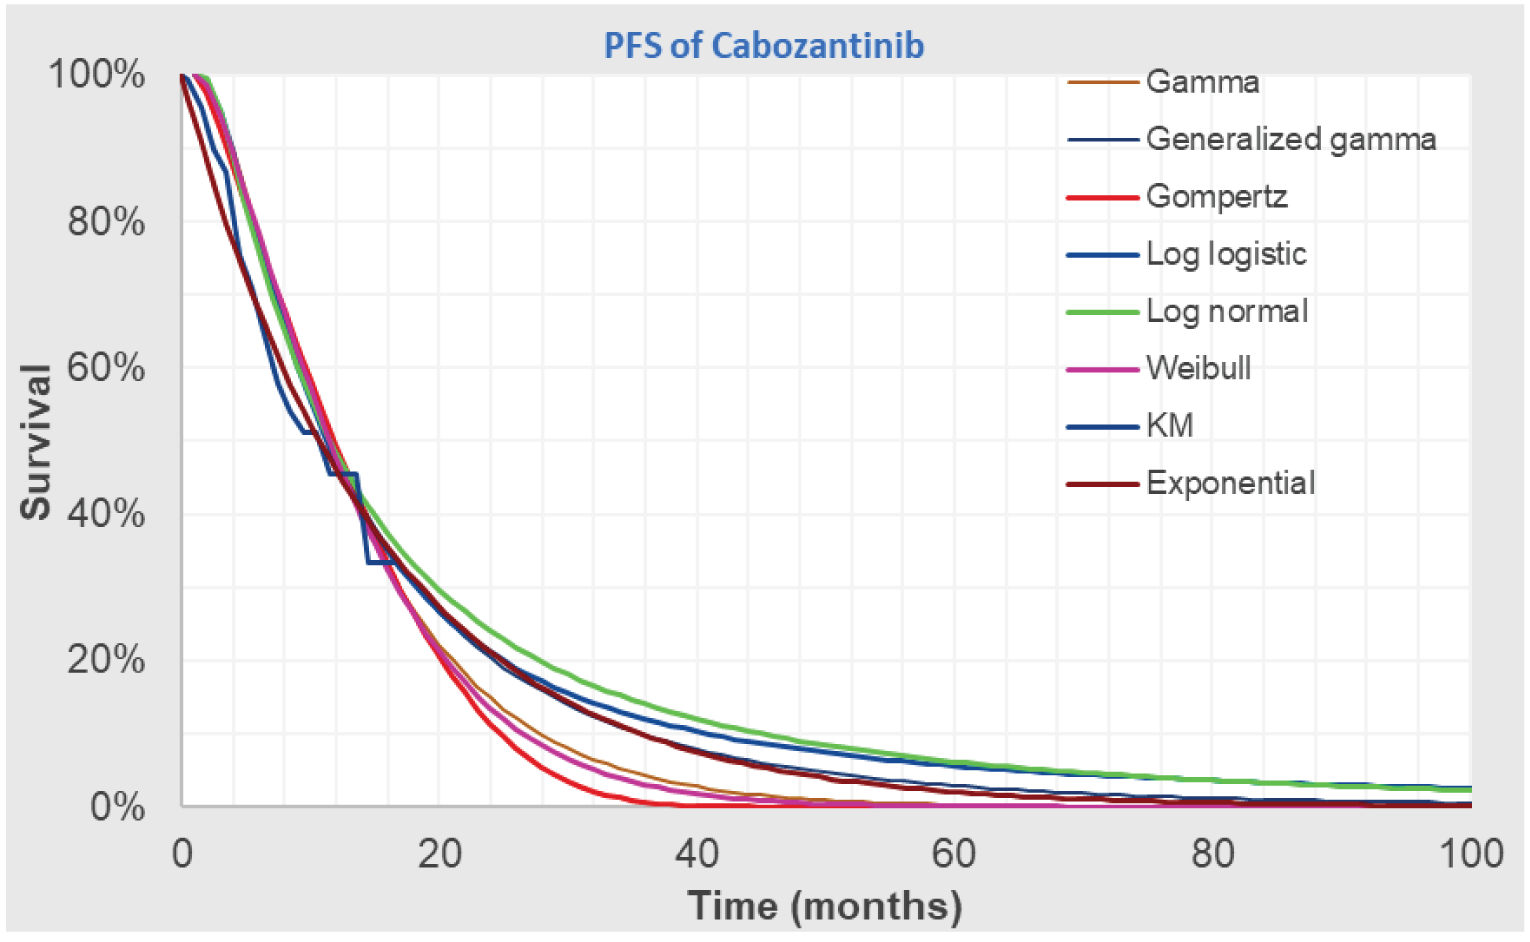 The figure that follows outlines the proportion of patients on cabozantinib who remain progression-free over time as observed in the trial (e.g., Kaplan-Meier curves) or as extrapolated based on different parametric survival functions.